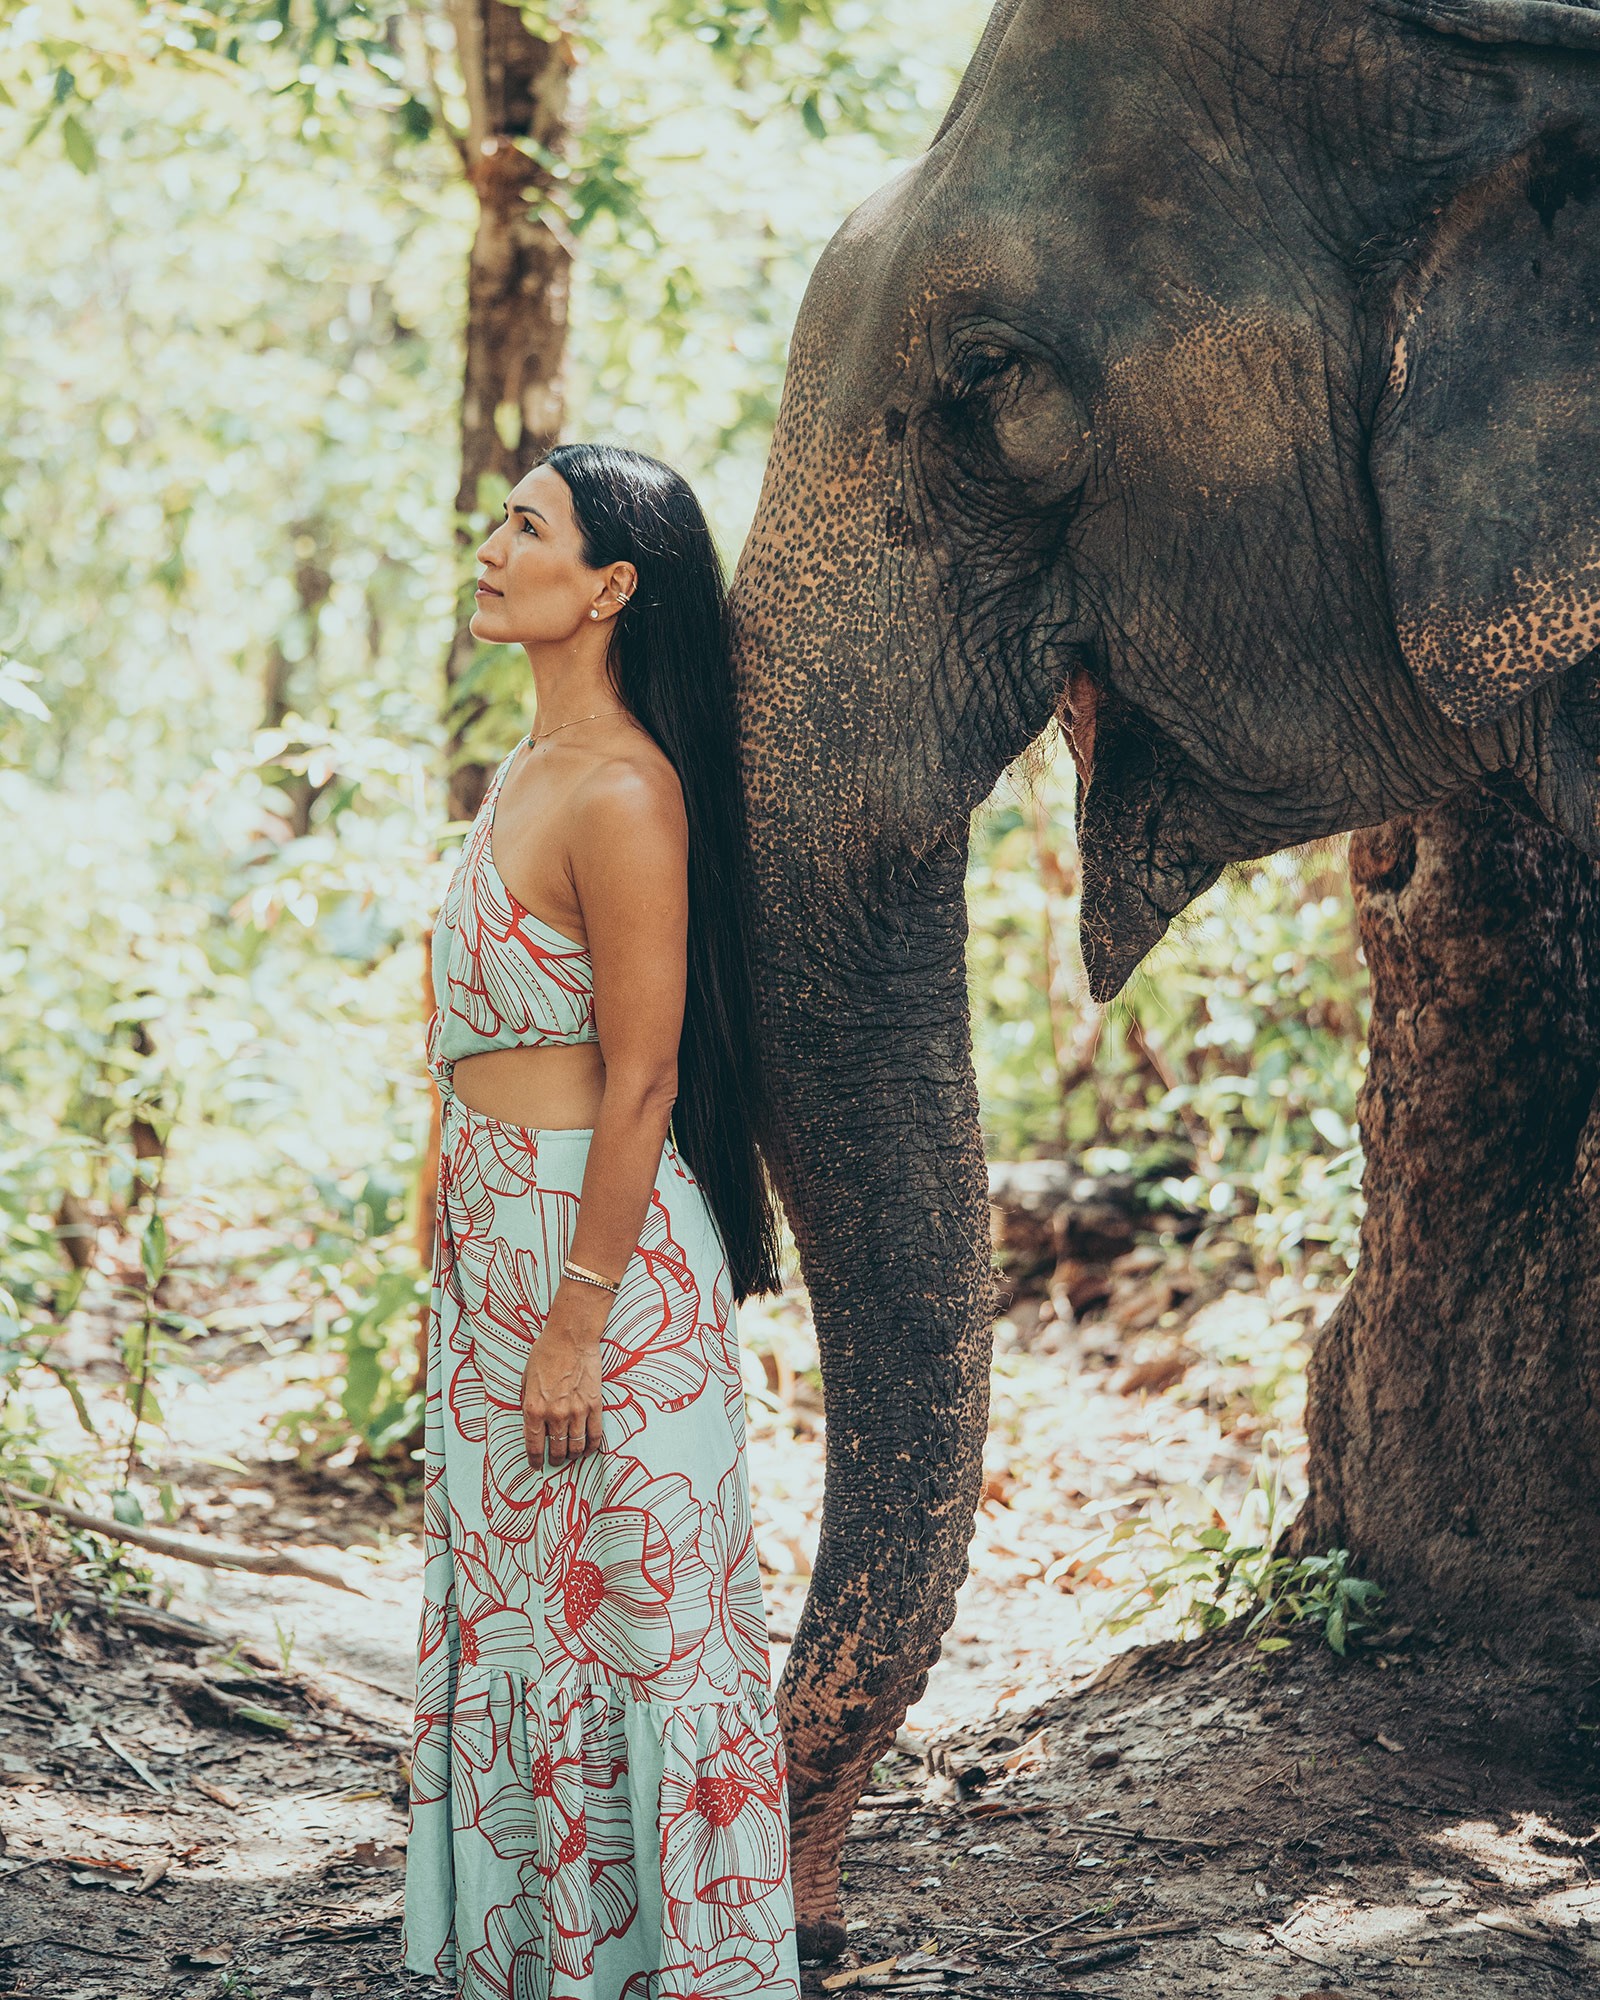 Silver Elephant – 60 min photoshoot at Chai Lai Orchid, Chiang Mai